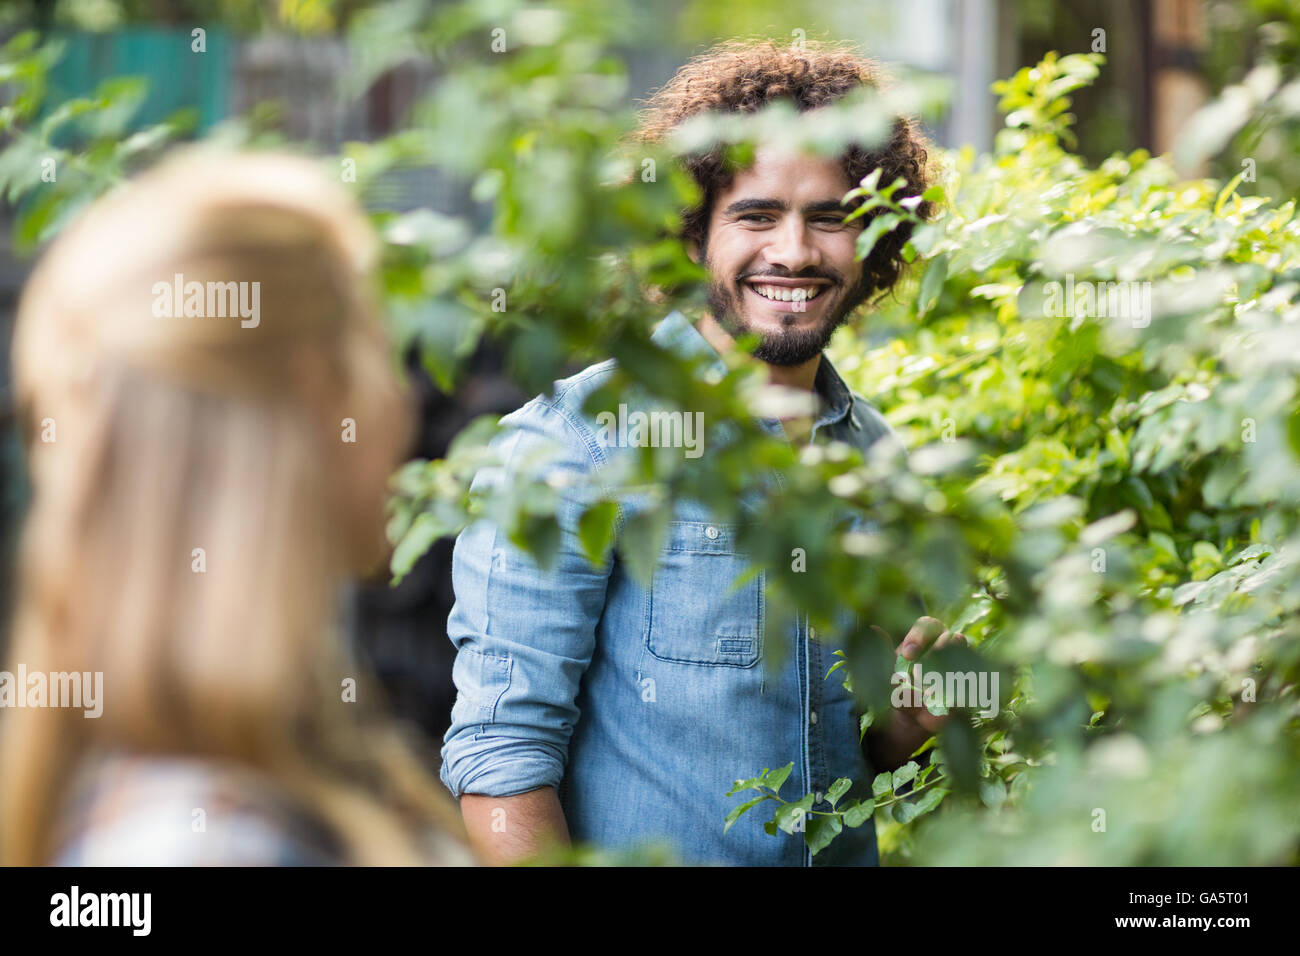 Male gardener looking at woman standing by plants Stock Photo